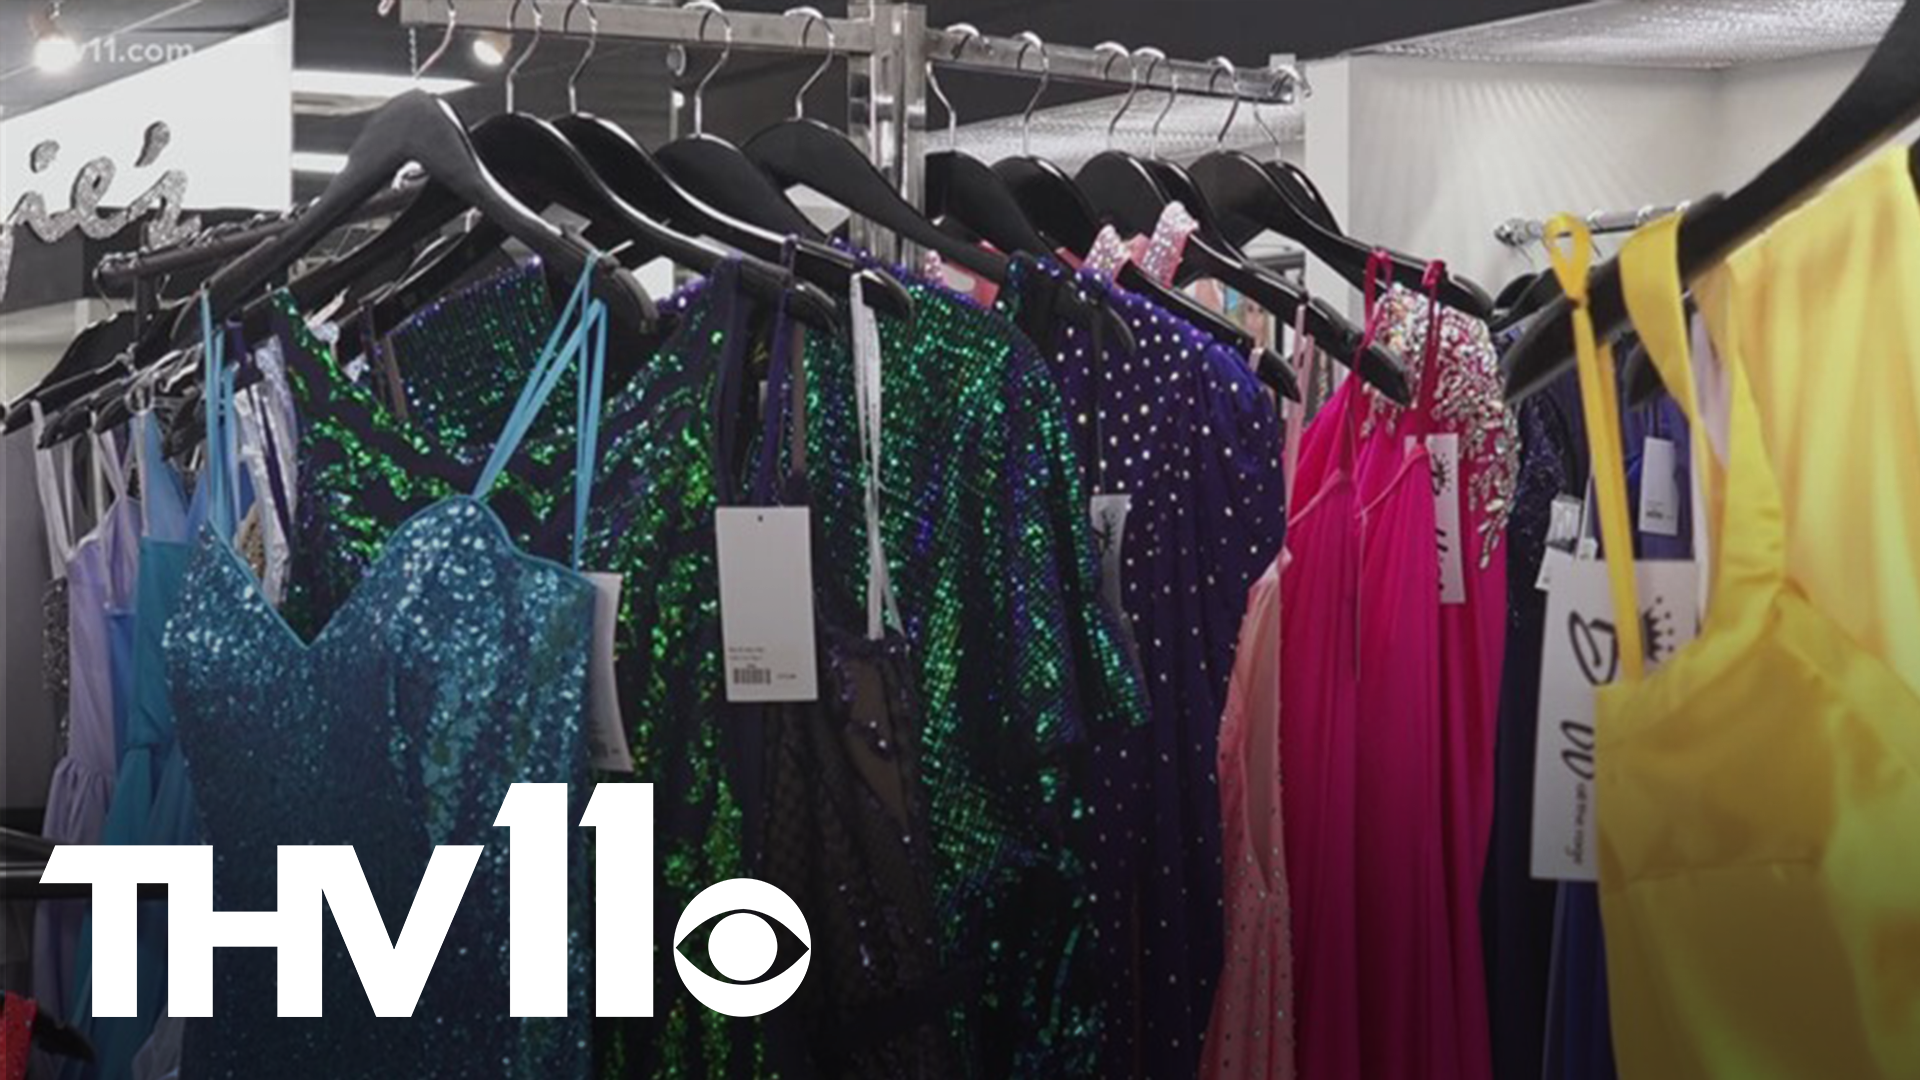 Over 600 dresses at Buffie's were left without love when the pandemic hit. But since Gov. Hutchinson loosened restrictions, dress sales have taken off.